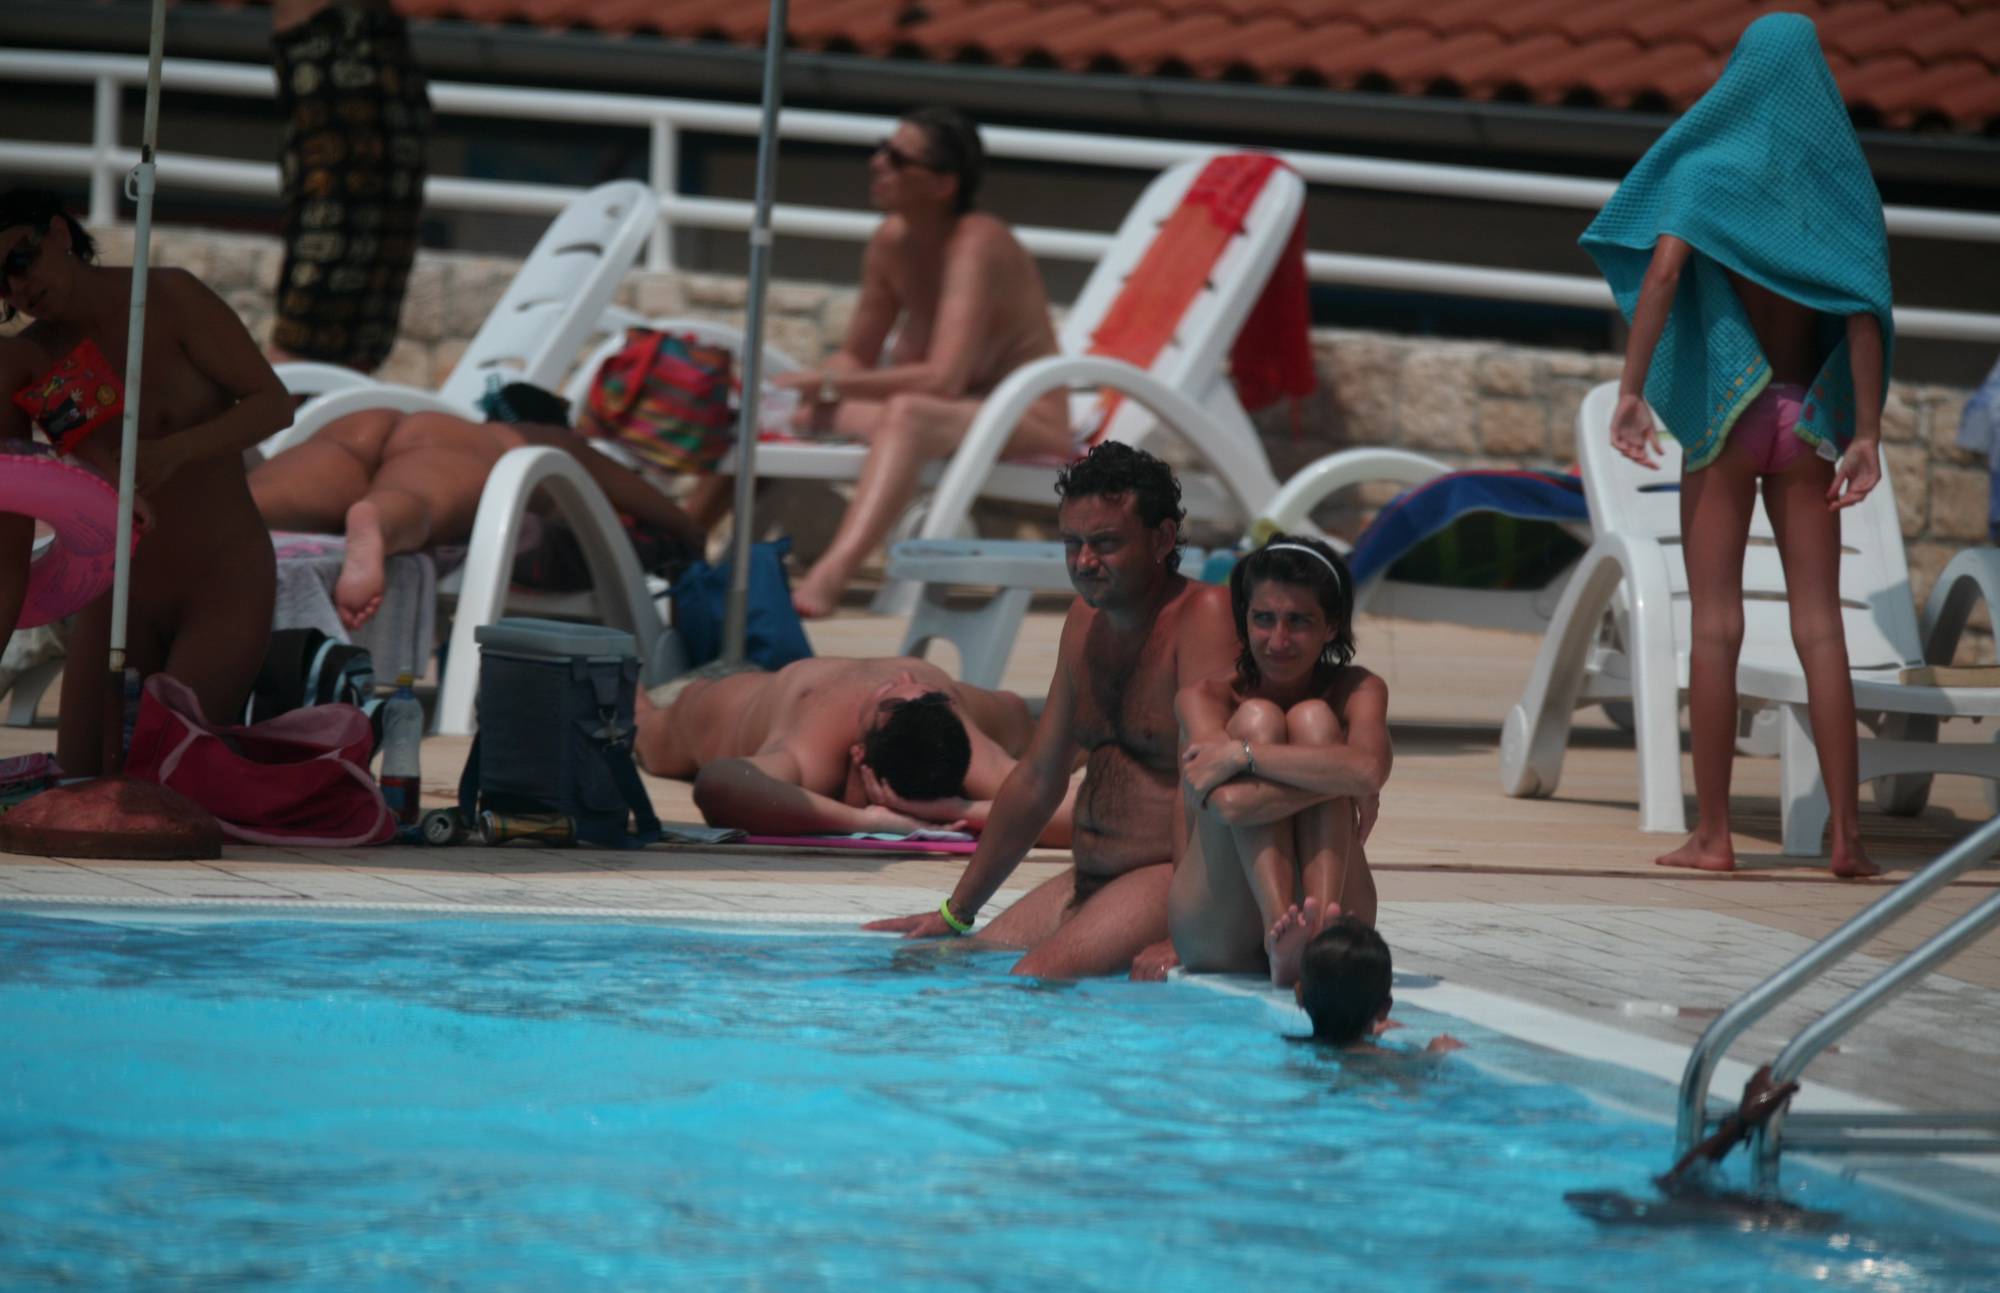 Naturist Pool Youngsters - 2